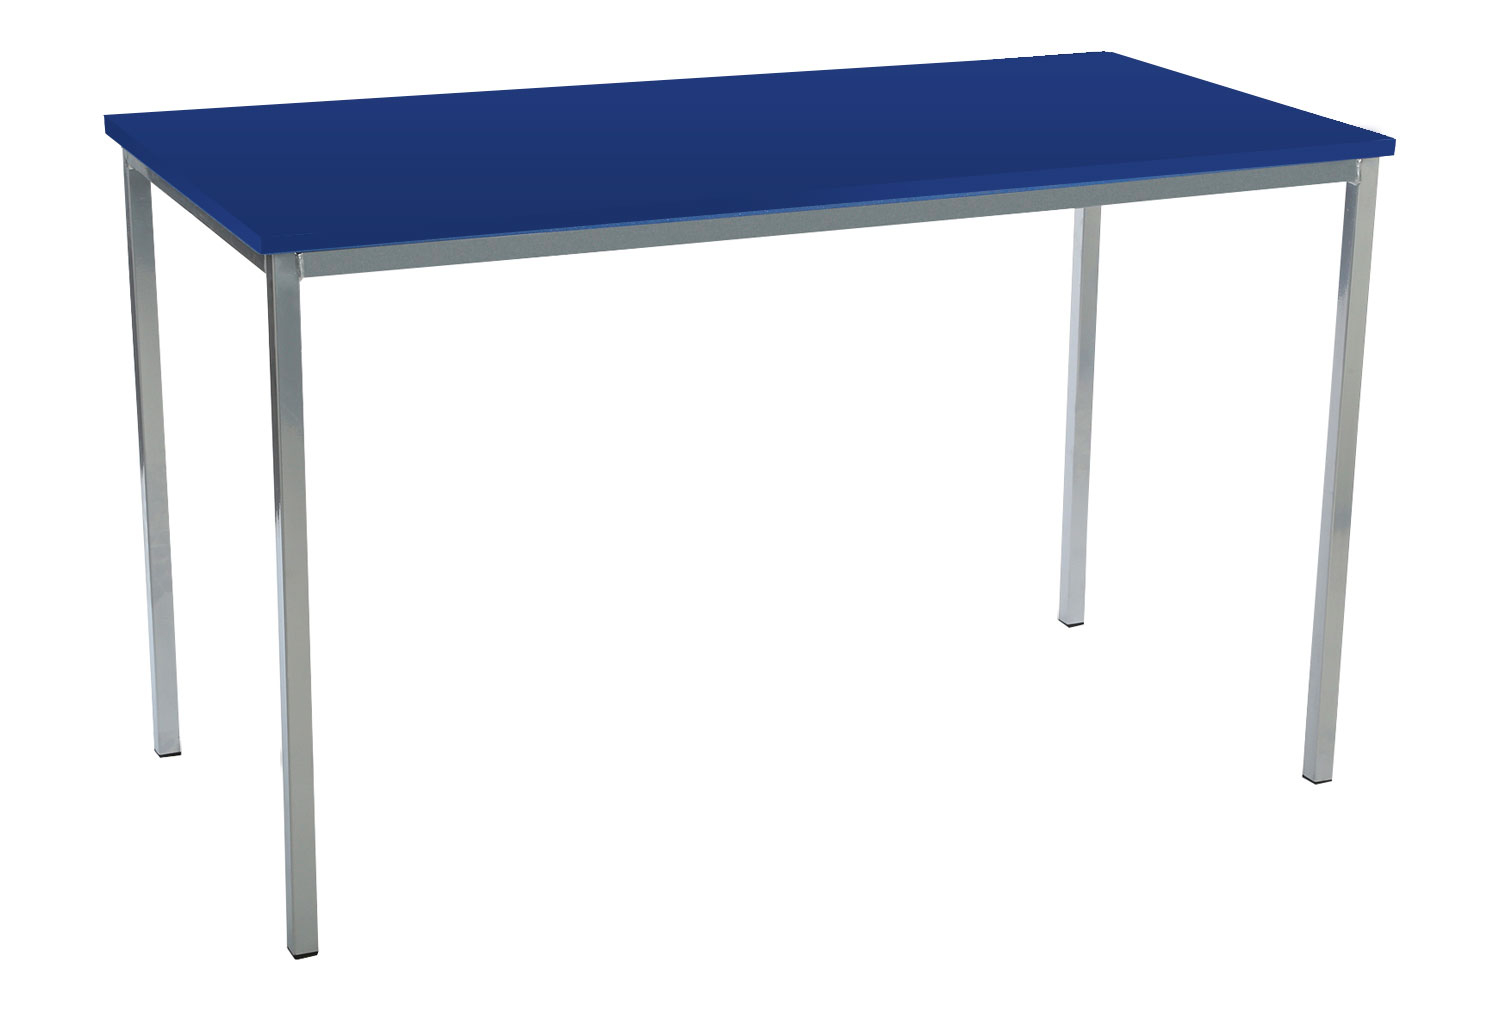 Qty 6 - Educate Fully Welded Rectangular Classroom Tables 14+ Years (PVC Edge), 120wx60d (cm), Light Grey Frame, Blue Top